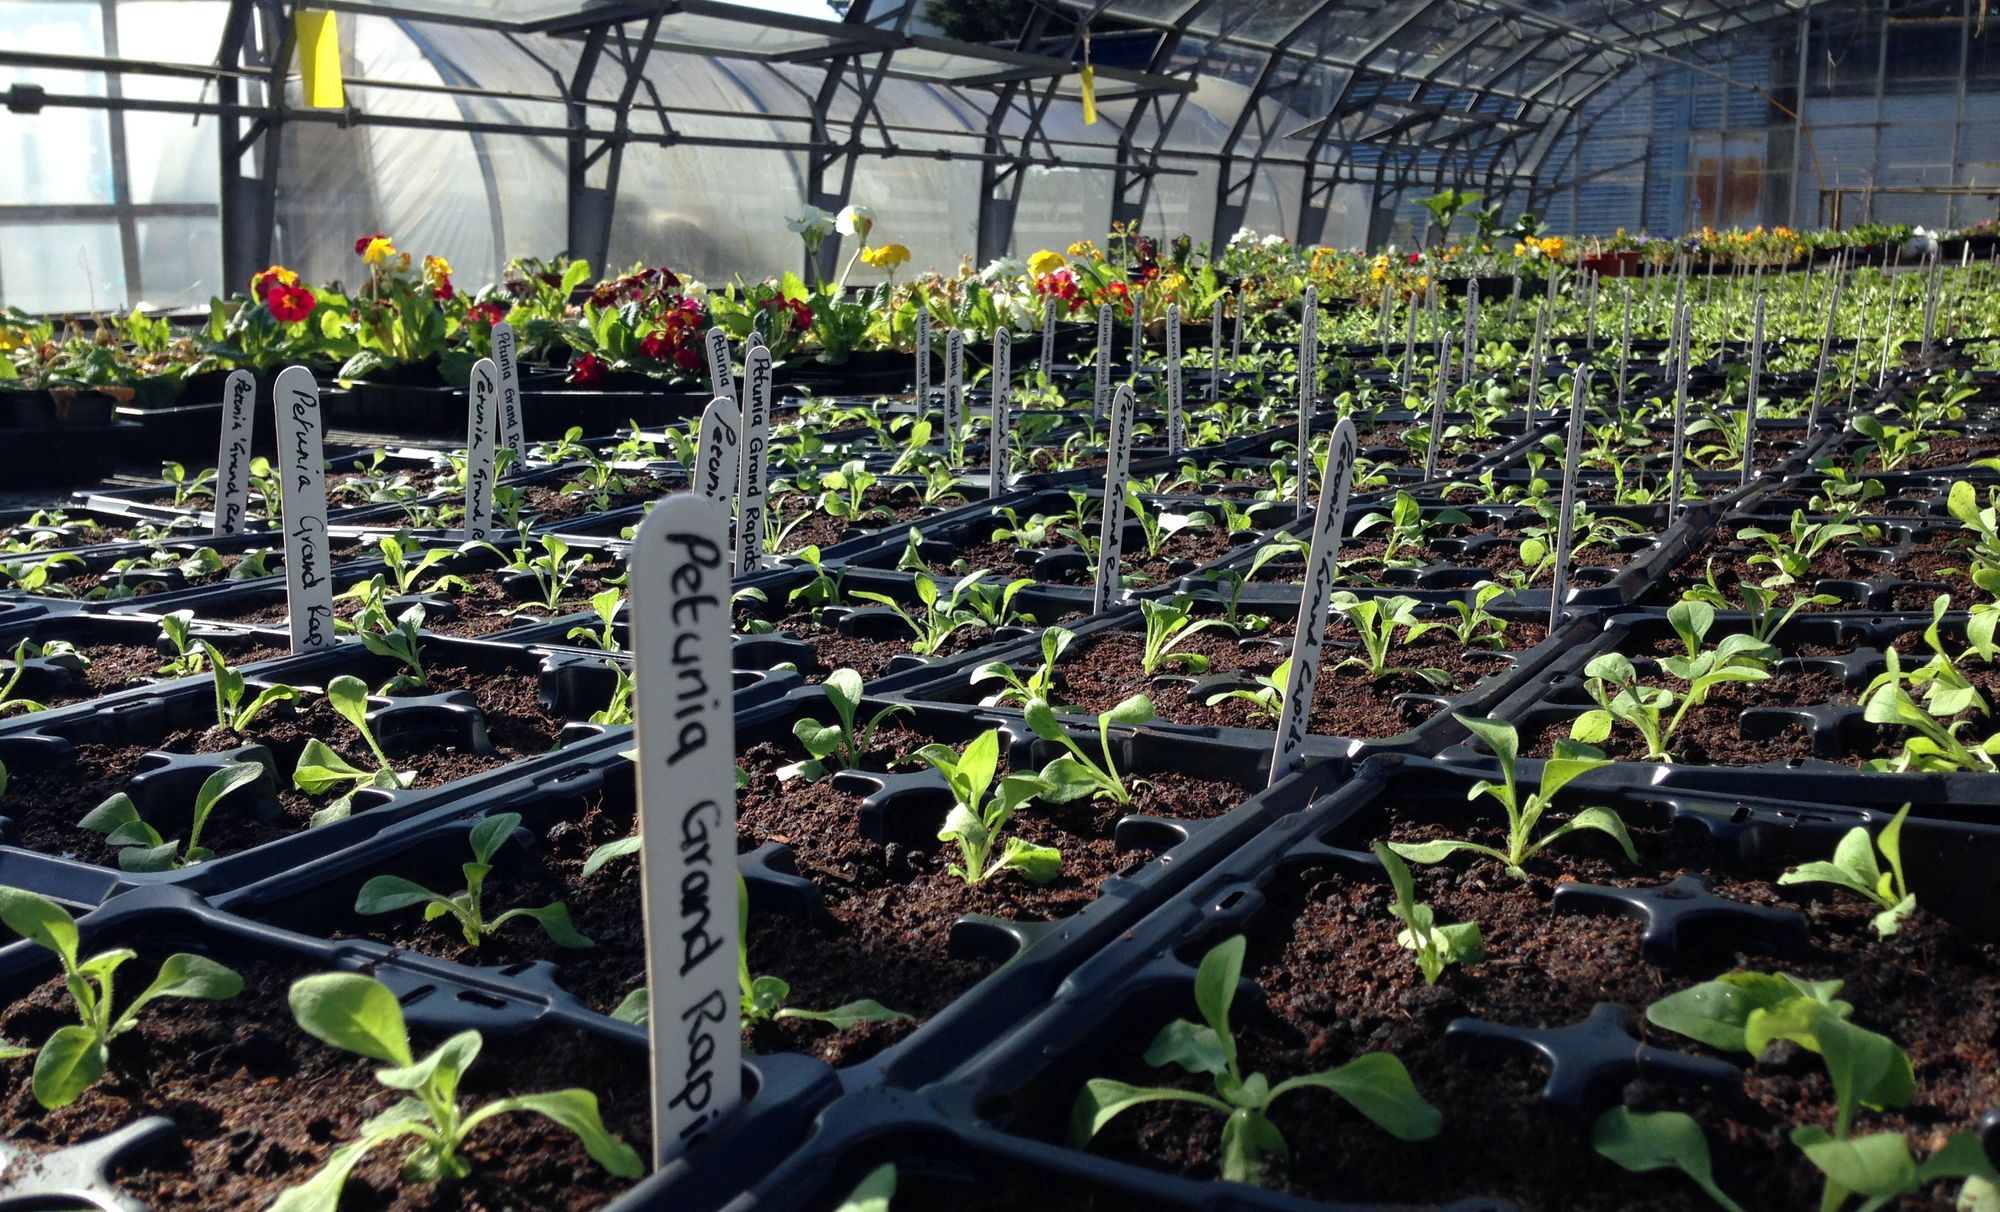 A photo of the inside of a large glasshouse full of rows of seedlings in seed trays.